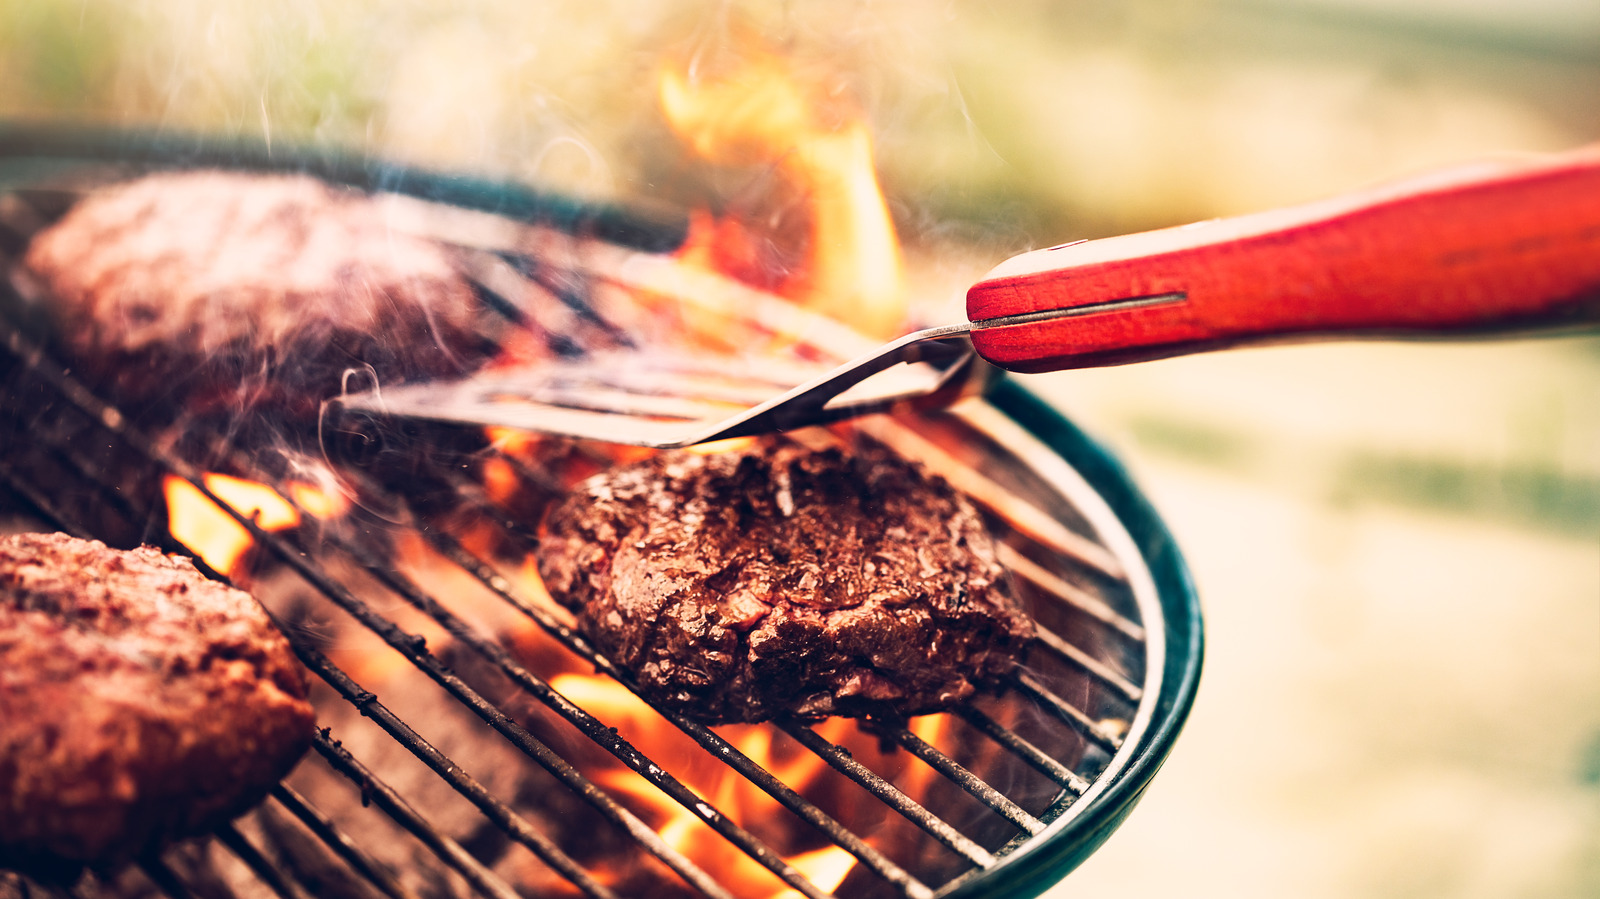 20 Tips You Need For Grilling The Ultimate Burgers This Summer